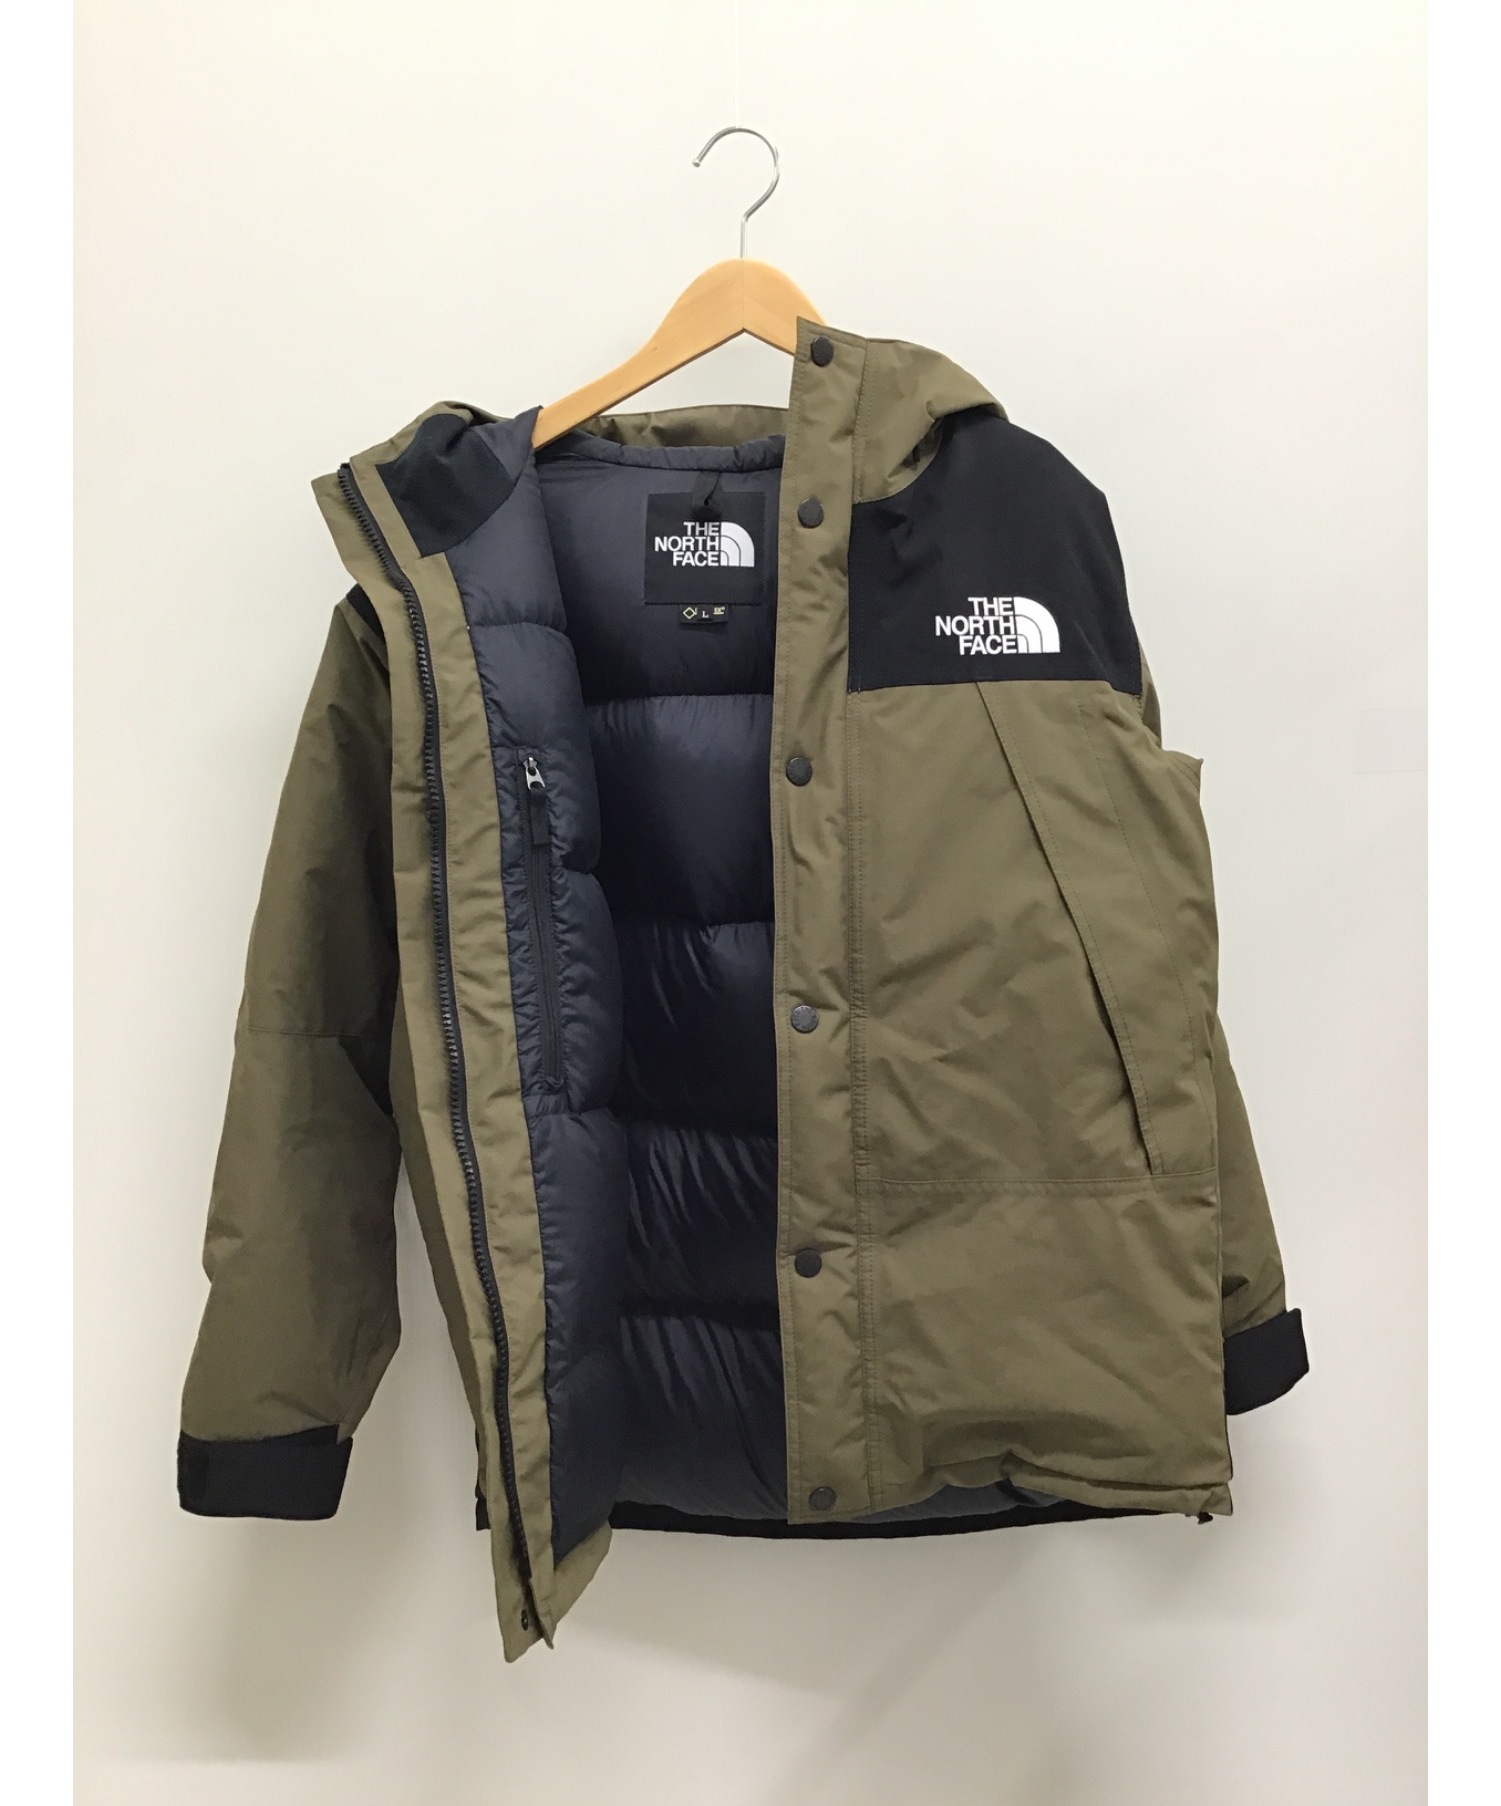 THE NORTH FACE (ザノースフェイス) Mountain Down Jacket ビーチグリーン サイズ:L ND91837